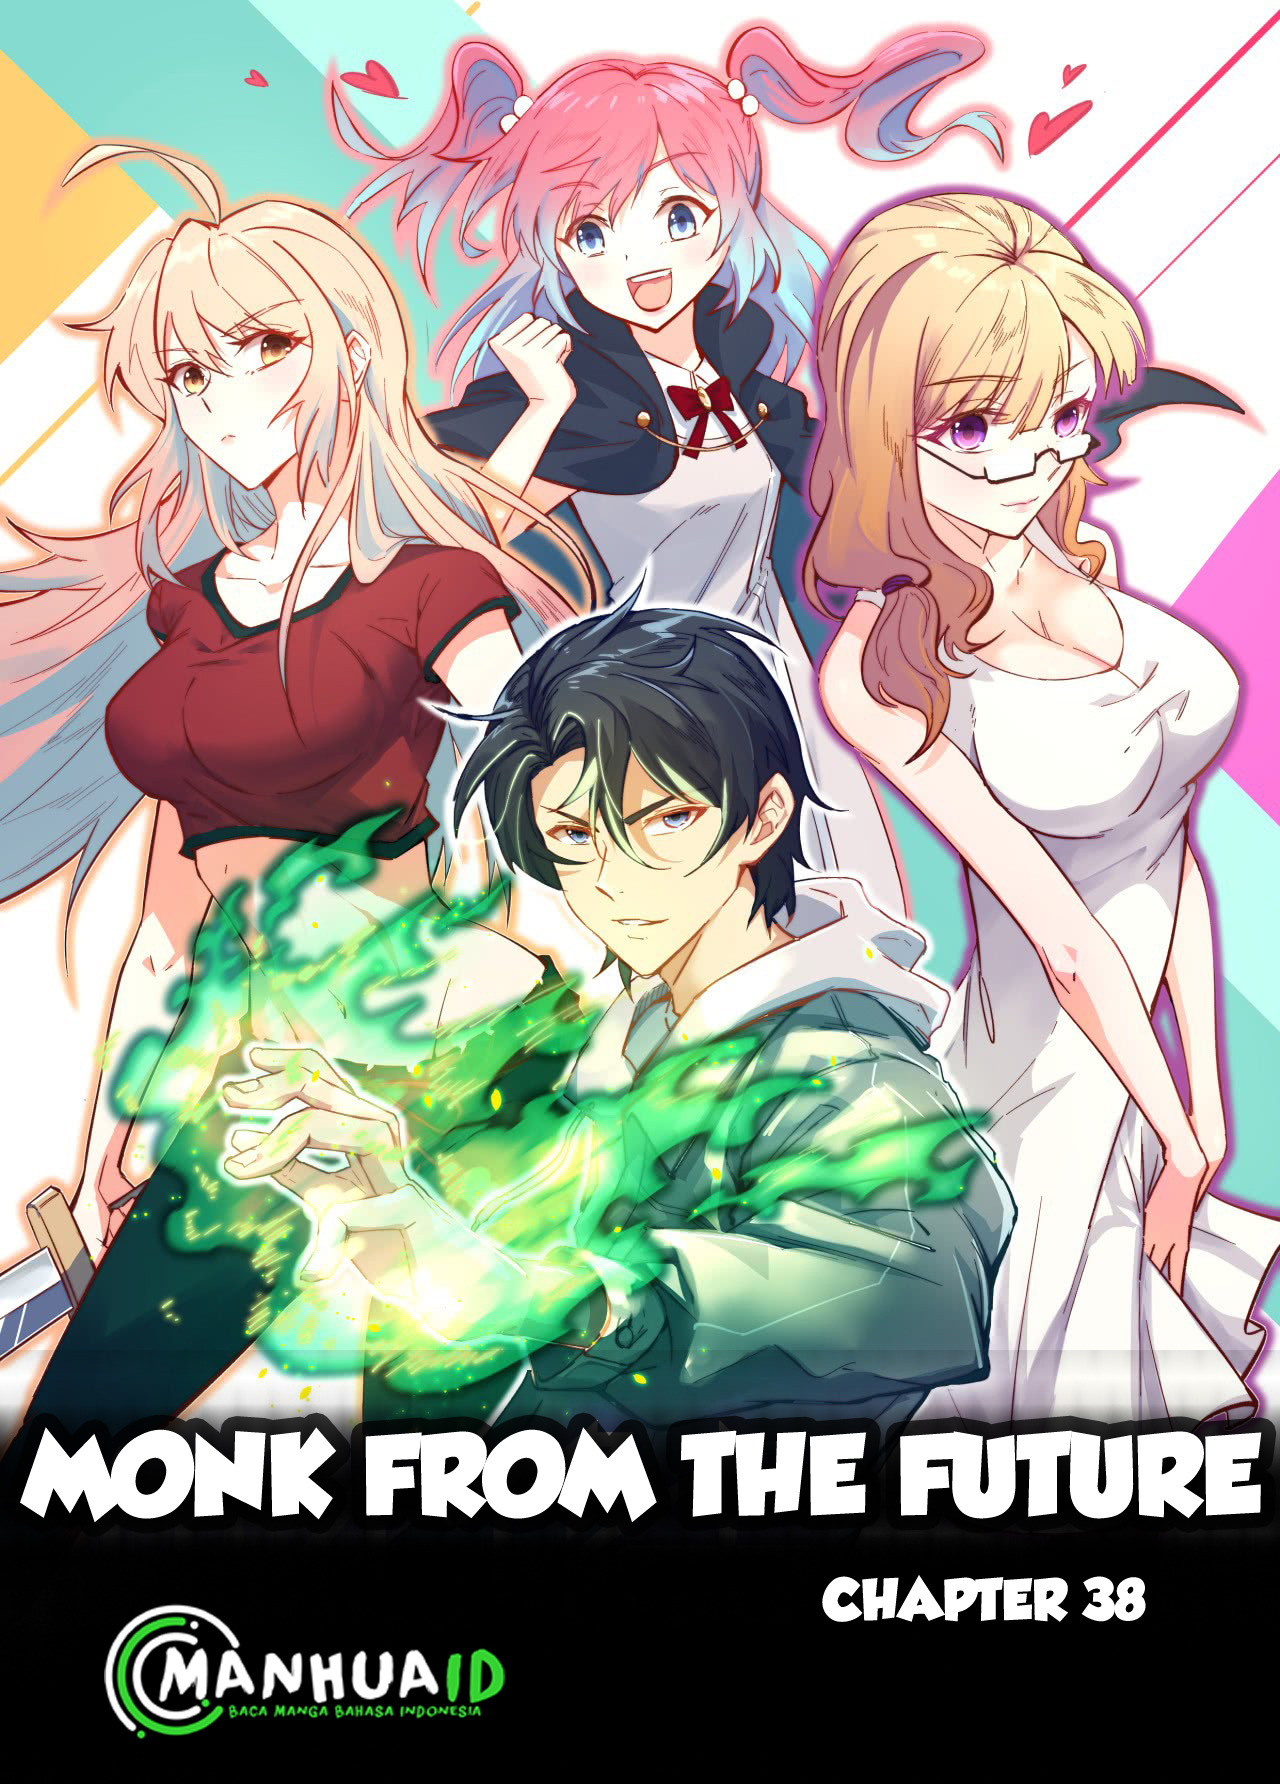 Monk From the Future Chapter 38